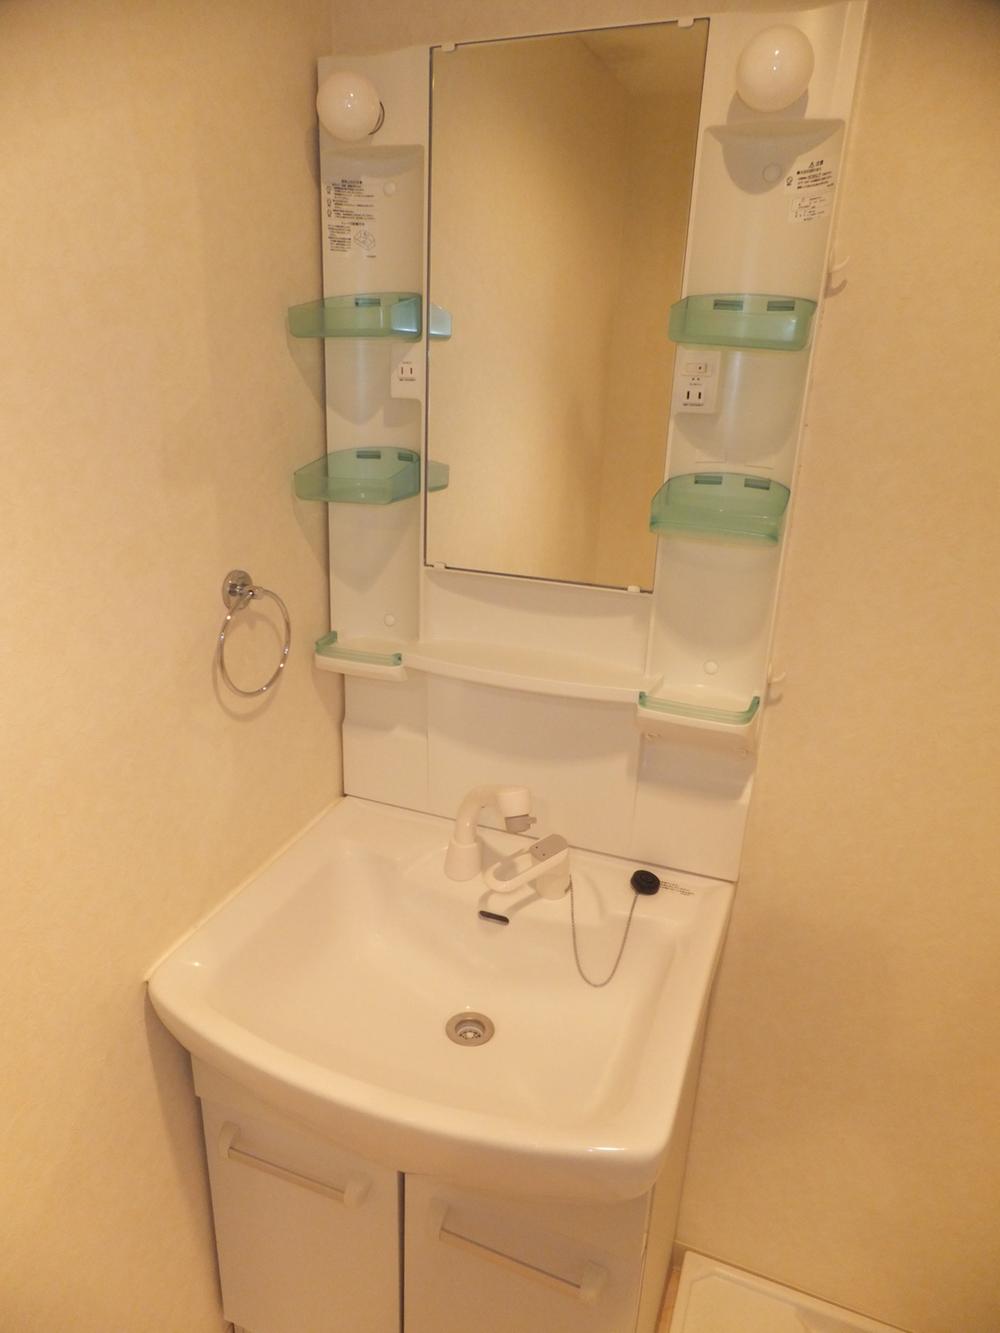 Wash basin, toilet. Wash room, Heisei wash basin in 22 years in April ・ We have to replace the waterproof bread.